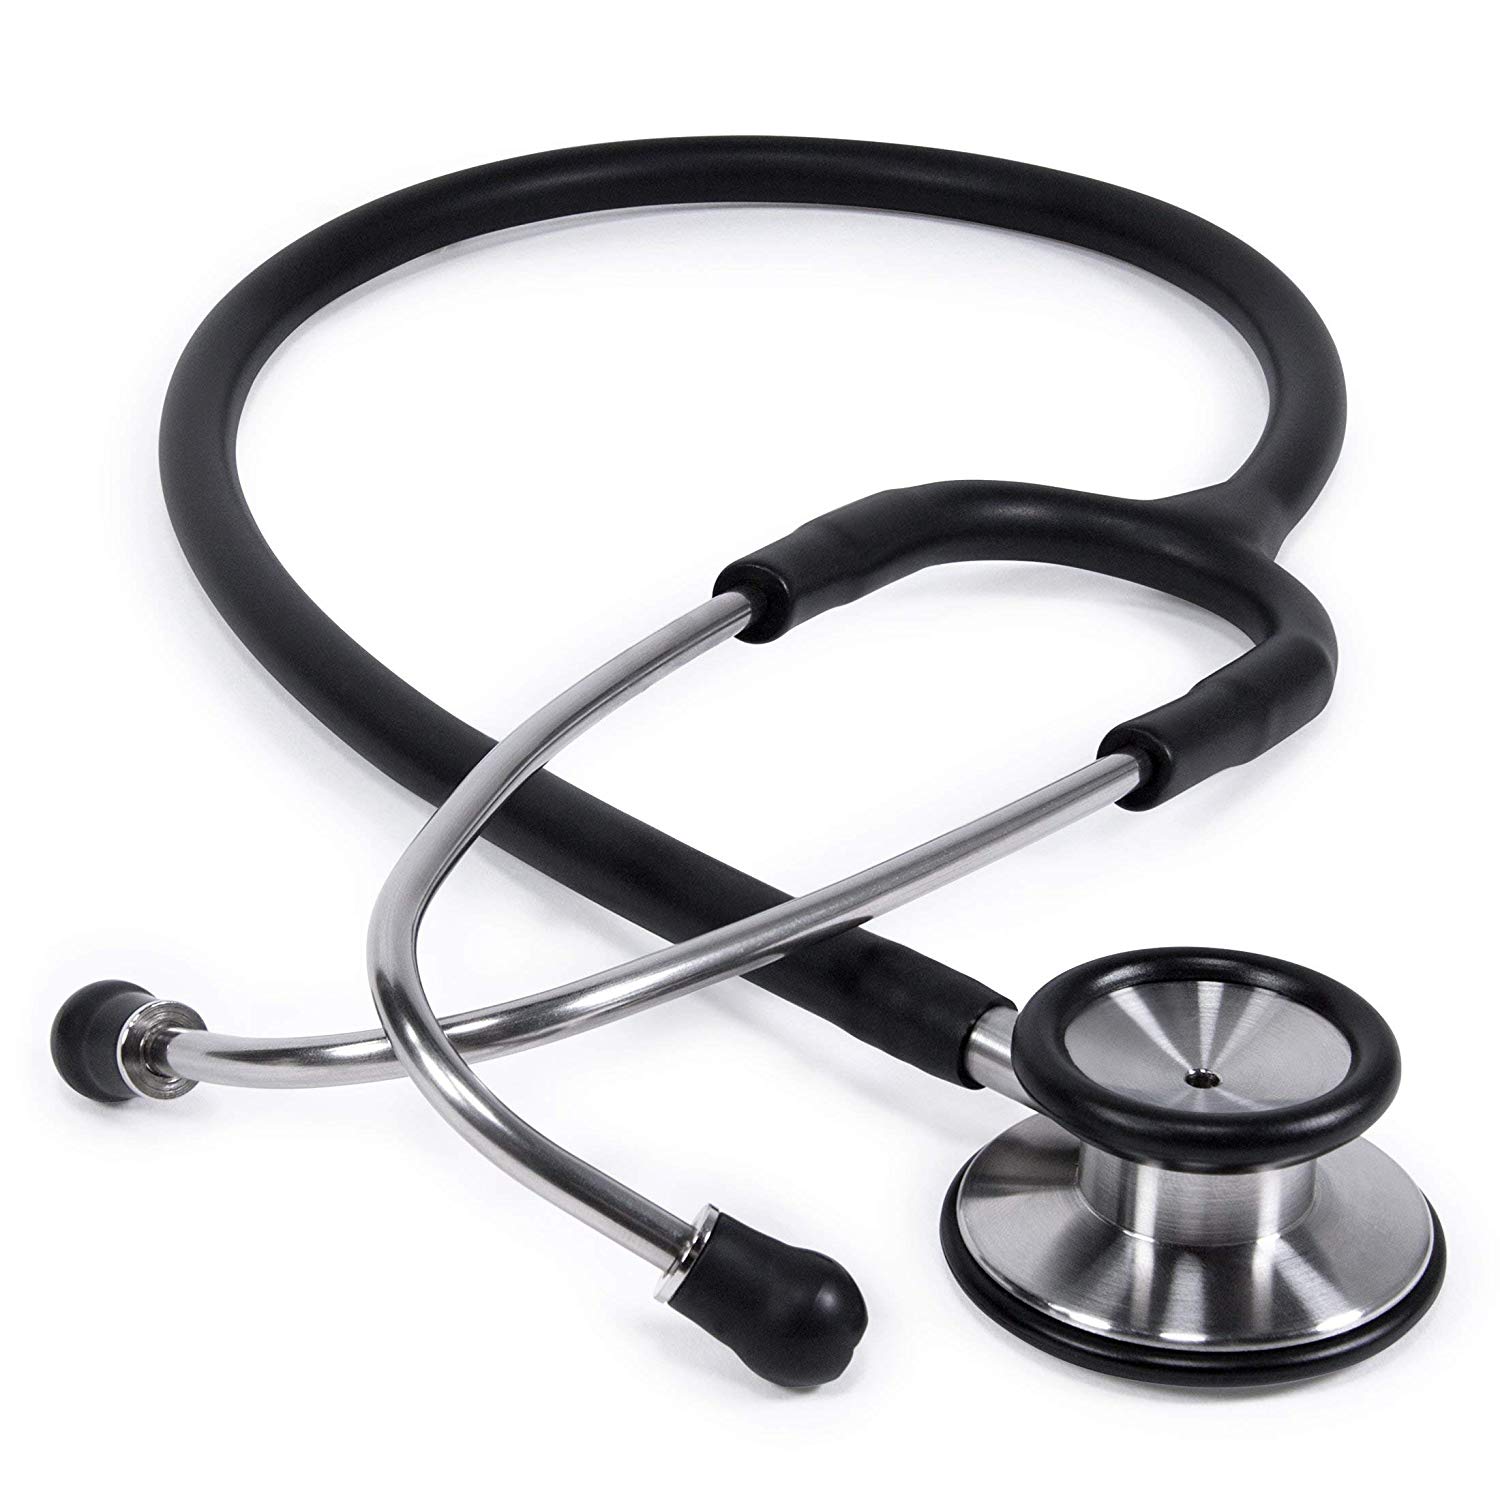 Amplified Stethoscopes: Hearing Instrument Programming Considerations